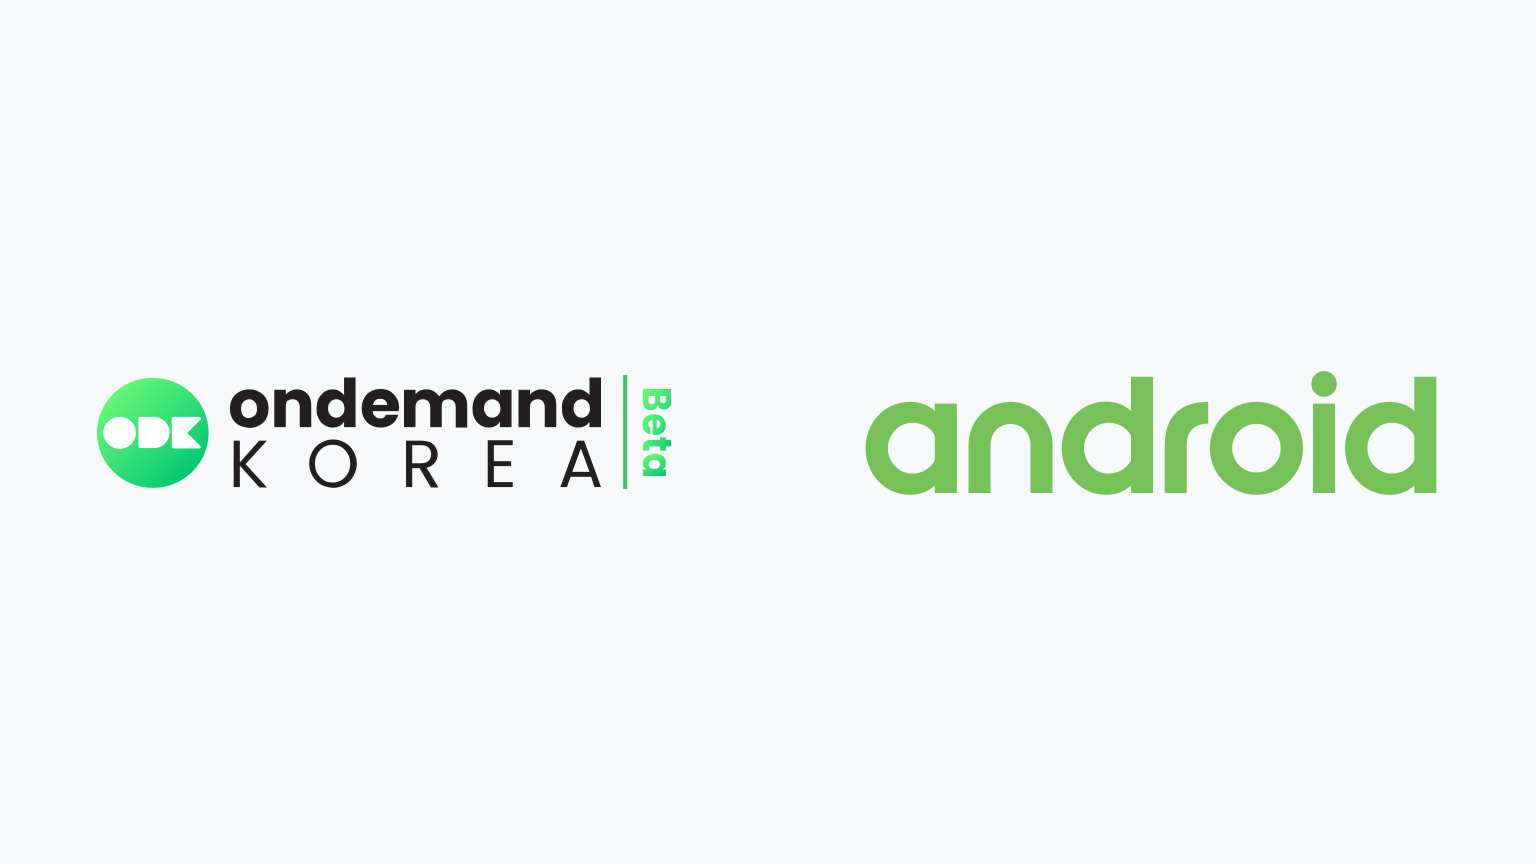 How to Watch OnDemandKorea on Android Phone/Tablet